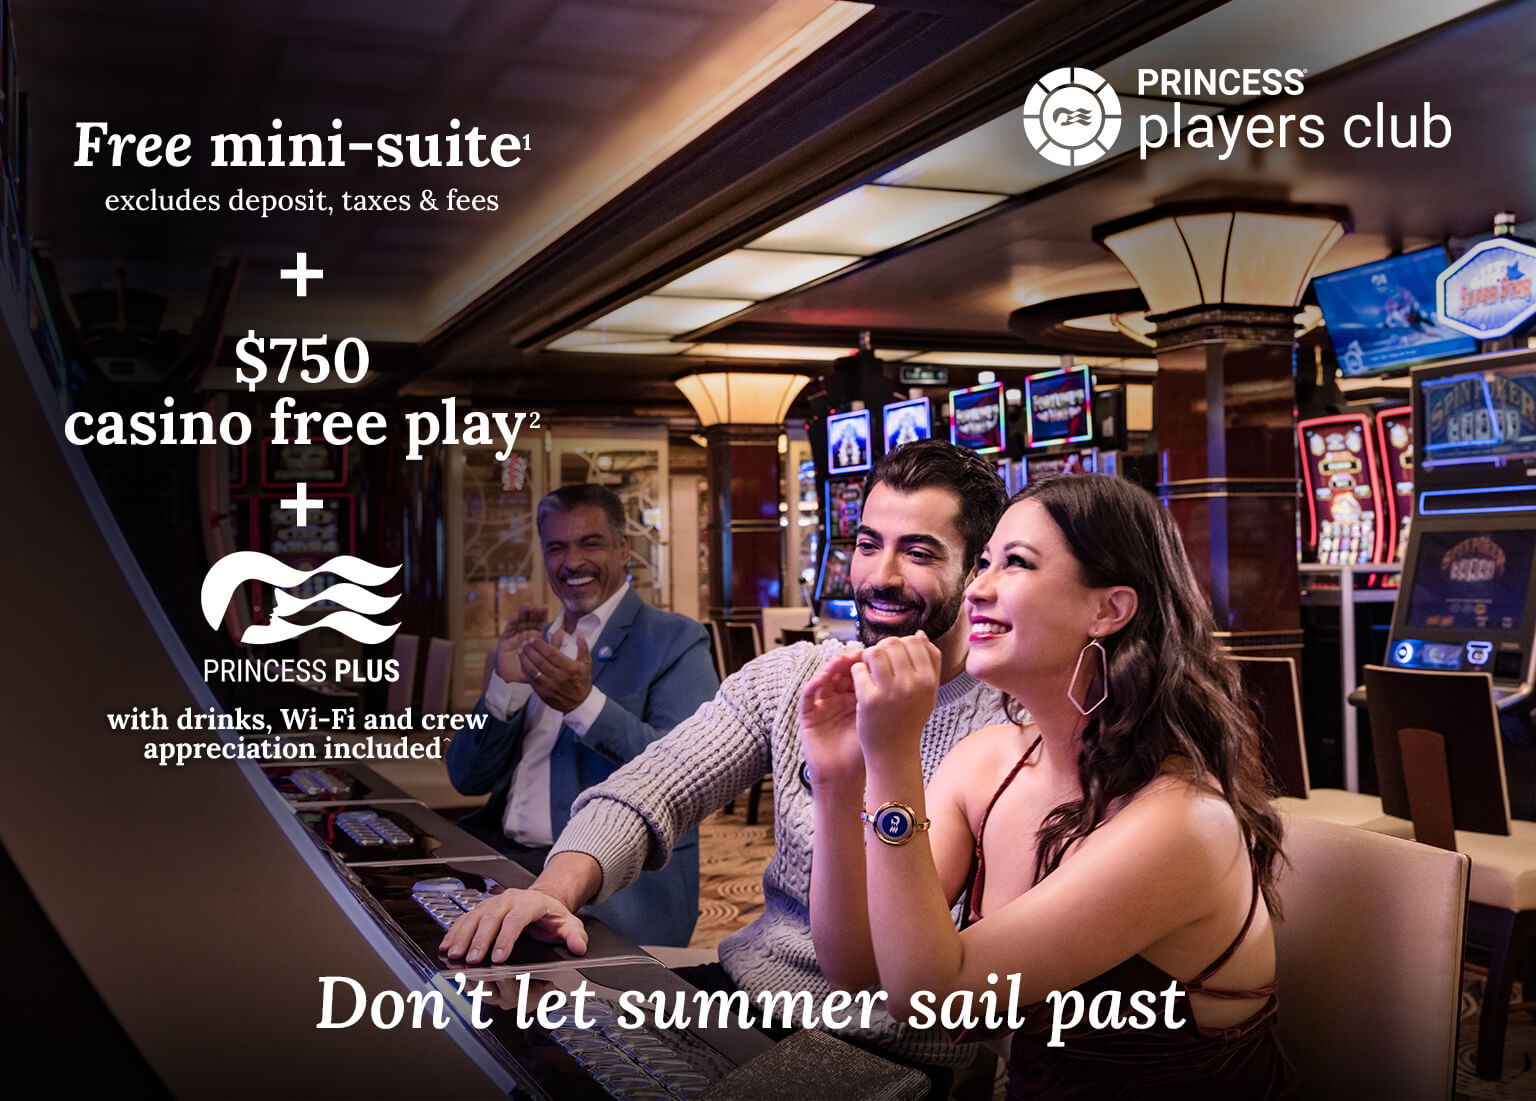 Free mini-suite + $750 casino free play + Princess Plus included. Click here to book.